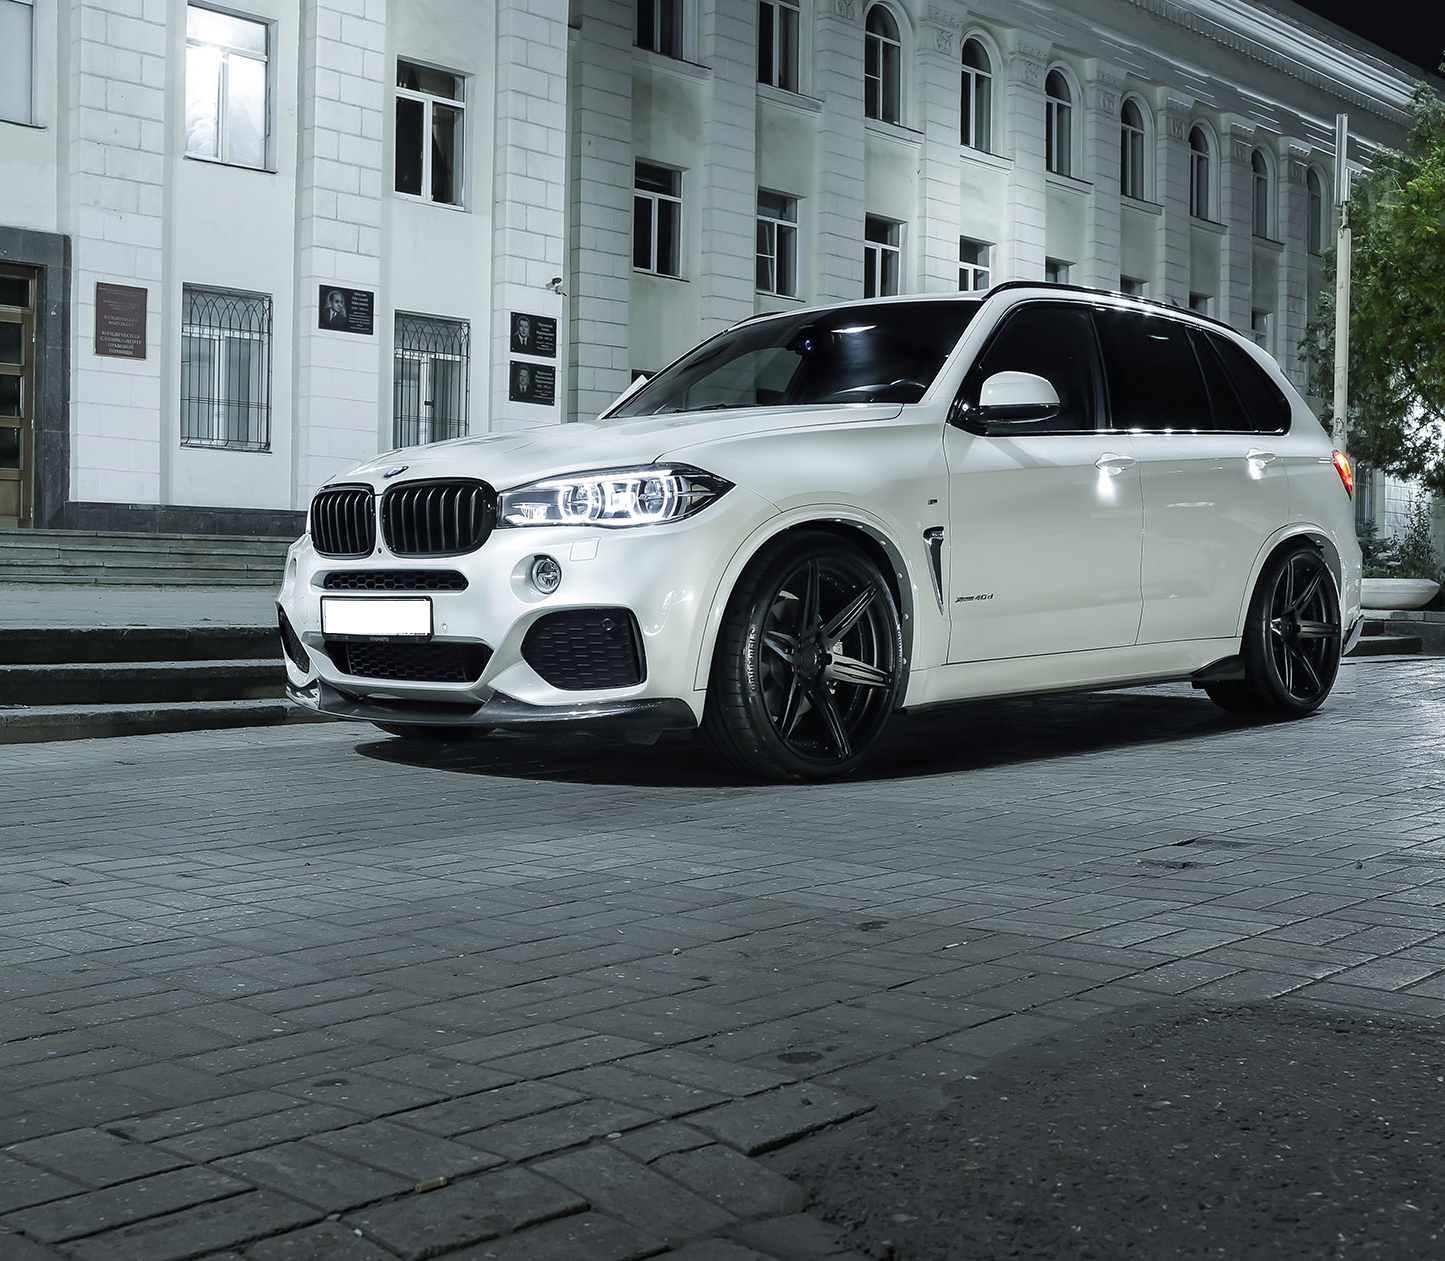 Image of a BMW X5 in front of apartment building